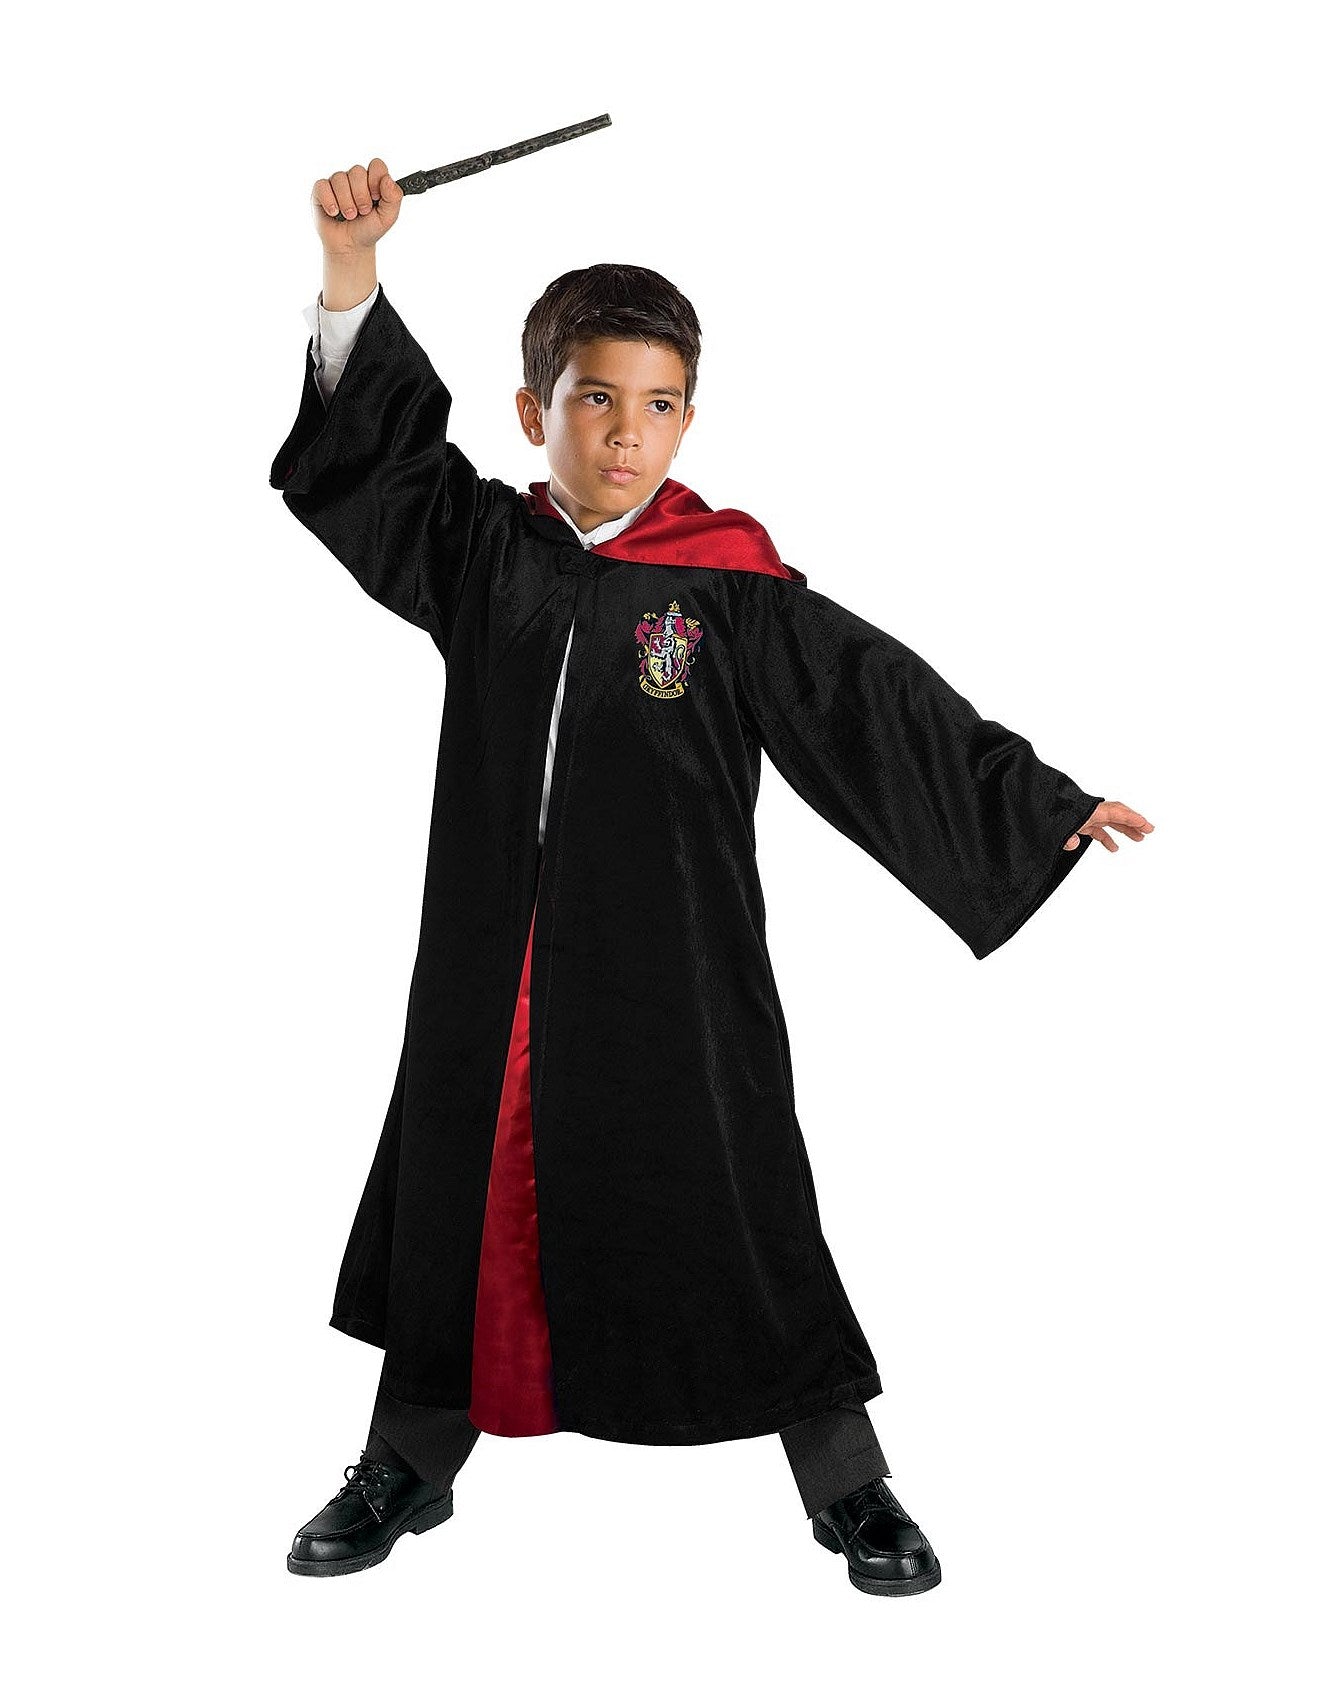 HARRY POTTER DRESS UP DELUXE ROBE SIZE 6